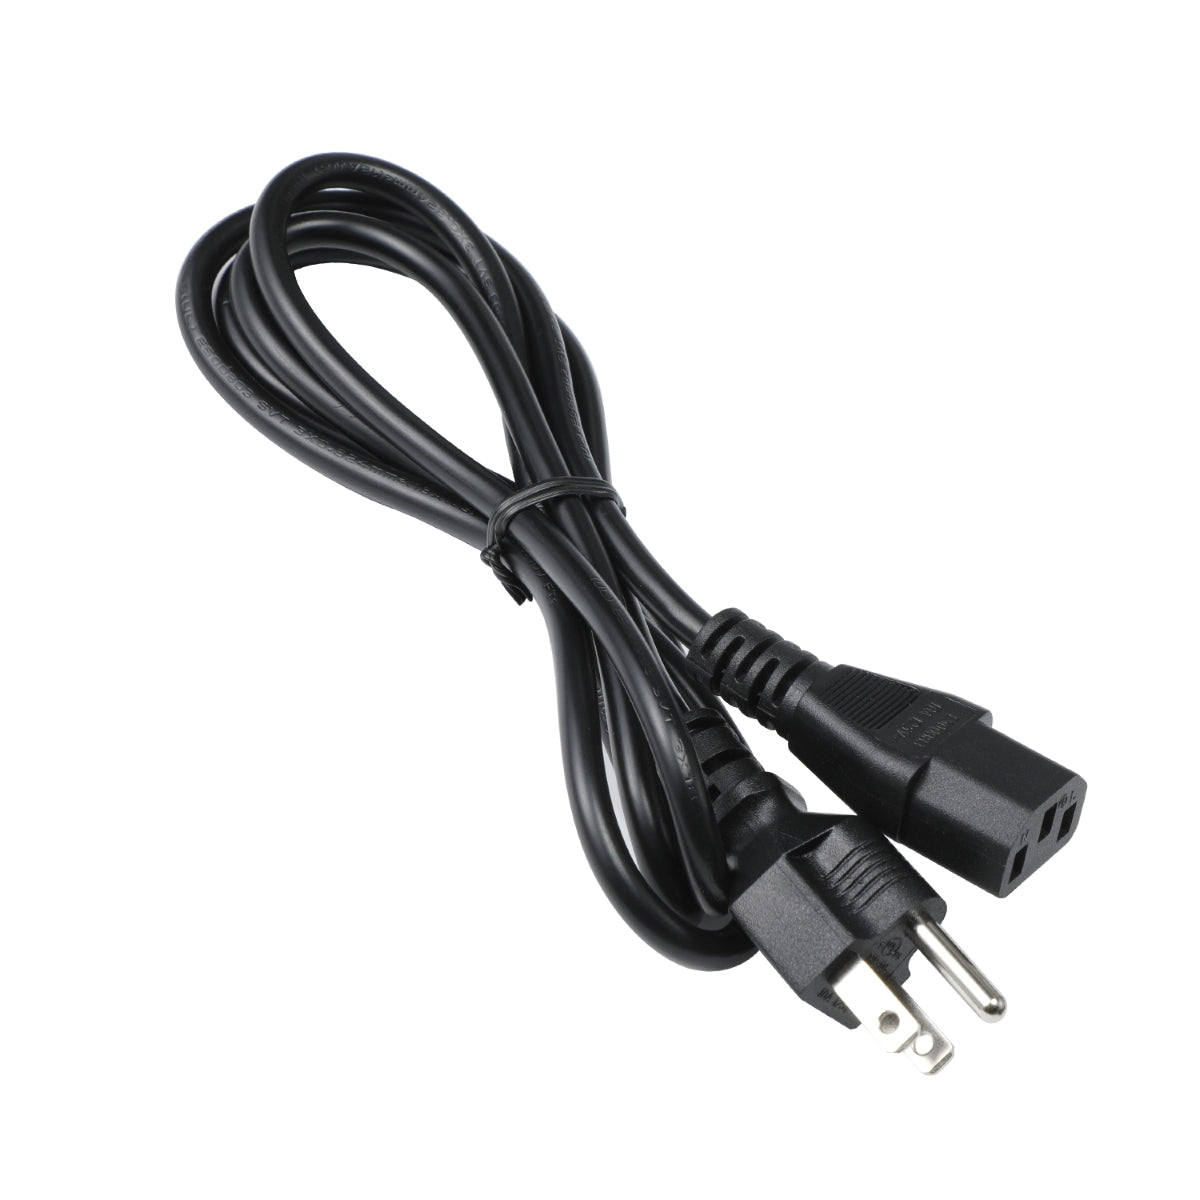 Power Cord for Acer XFA240 Monitor.